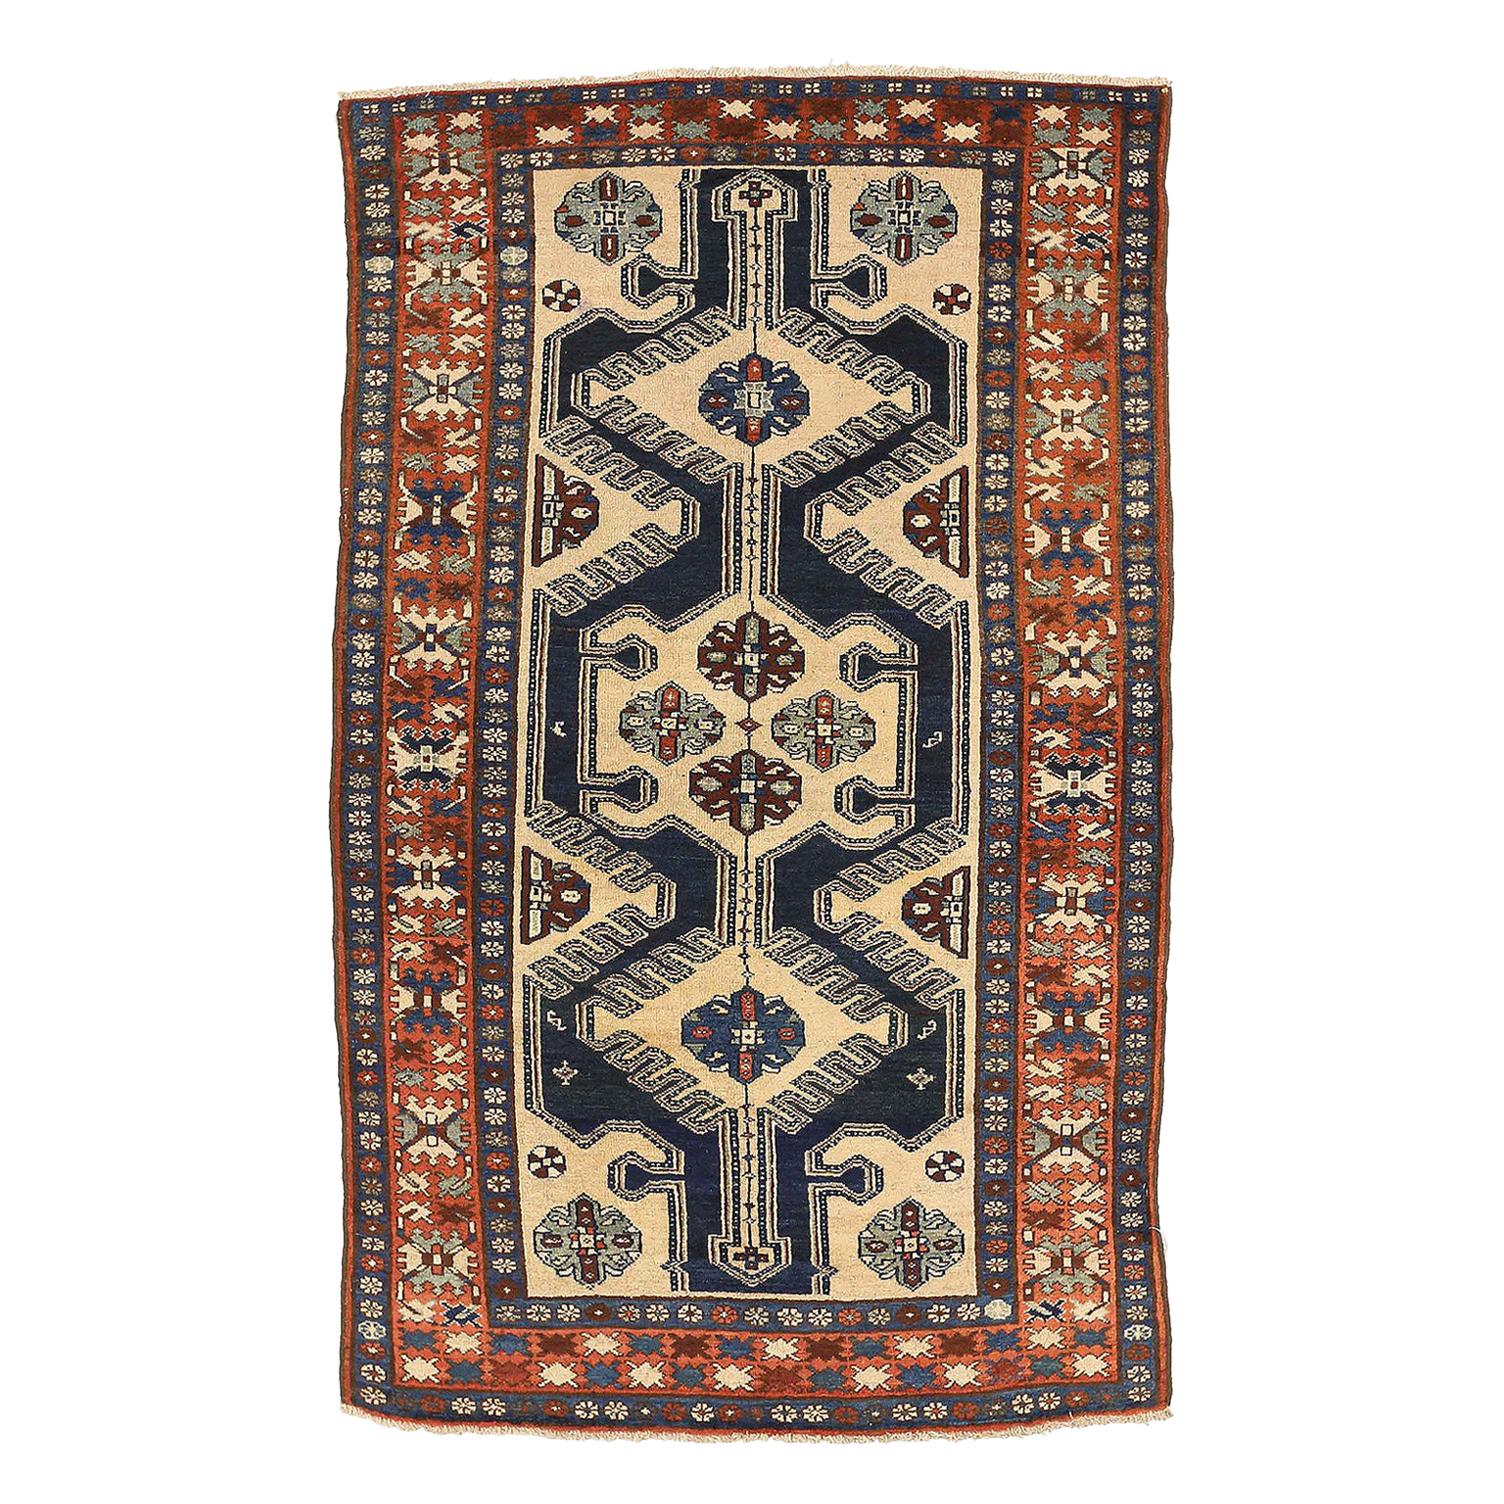 Antique Persian Hamadan Rug with Gray and Beige Flower Details on Black Field